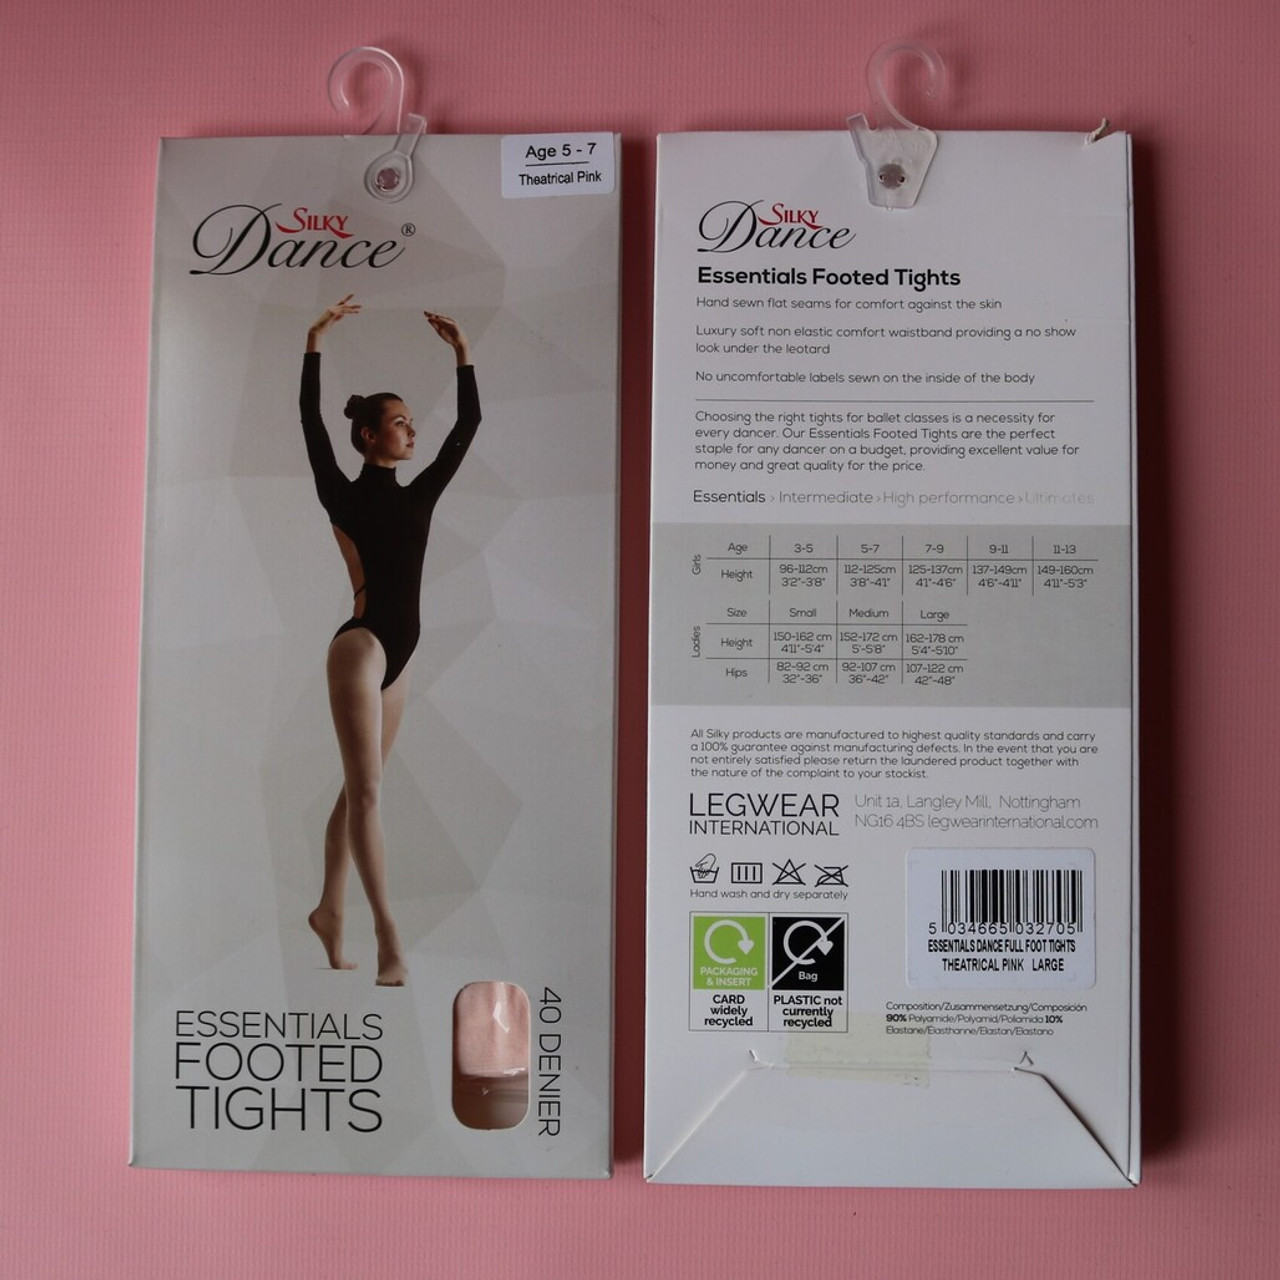 Silky Tights Ultimate Footed Tights - Theatrical Pink